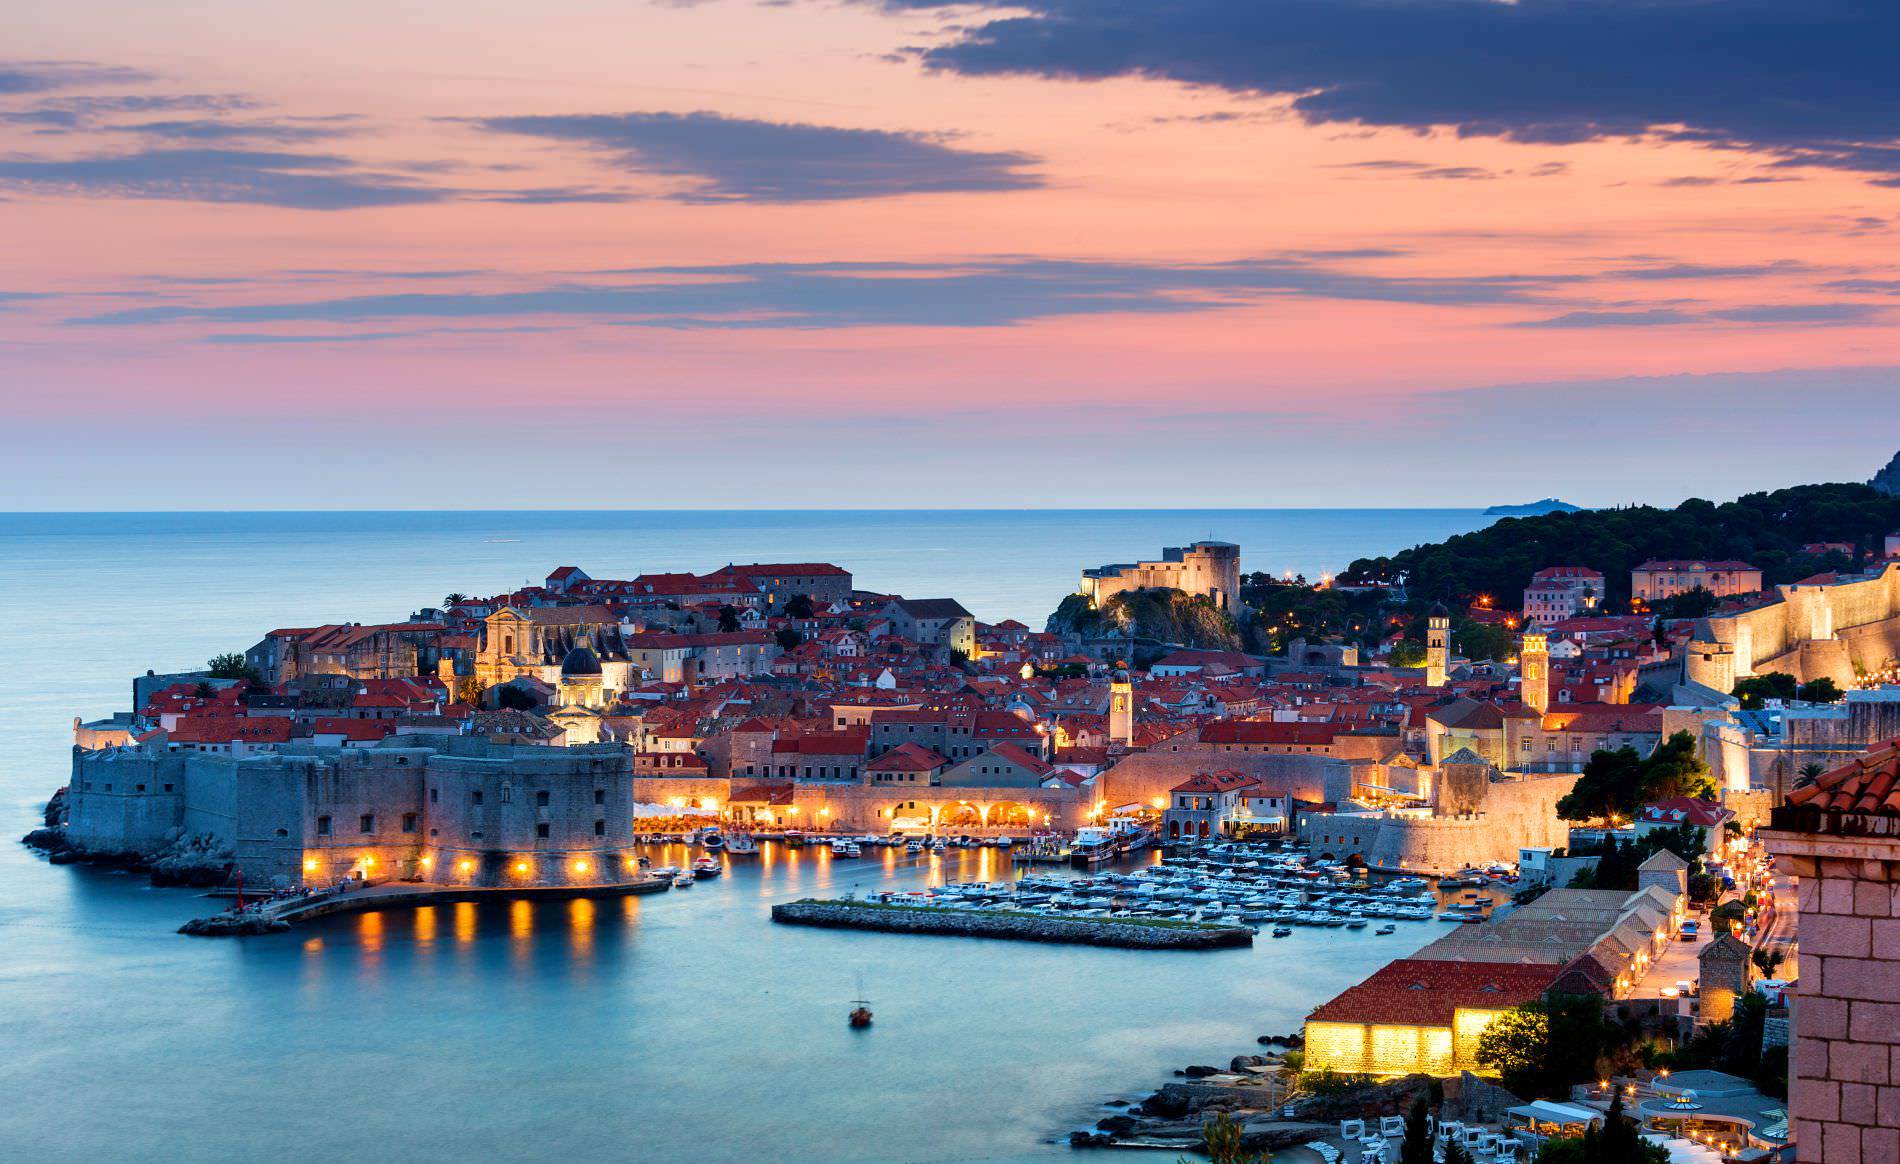 Dubrovnik Wallpaper Image Photos Pictures Background